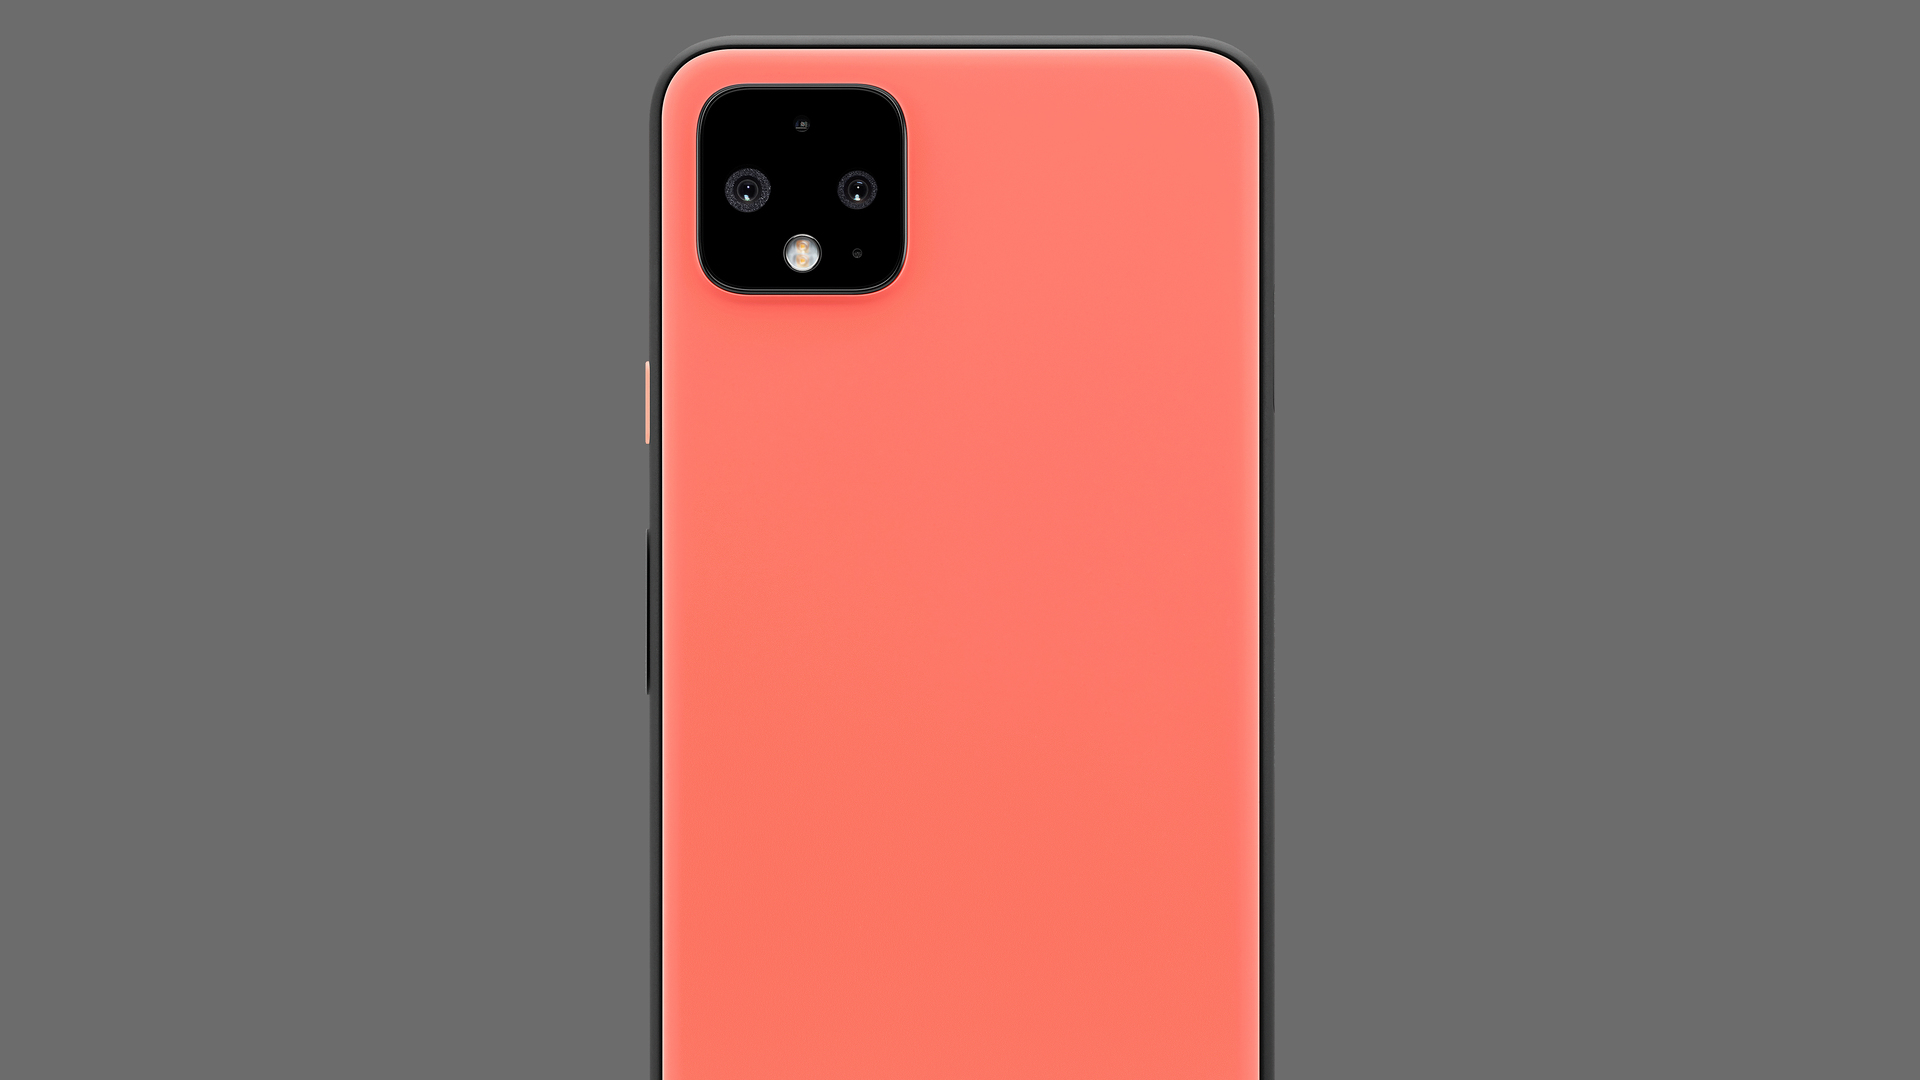 google pixel 4 xl oh so orange with gray background